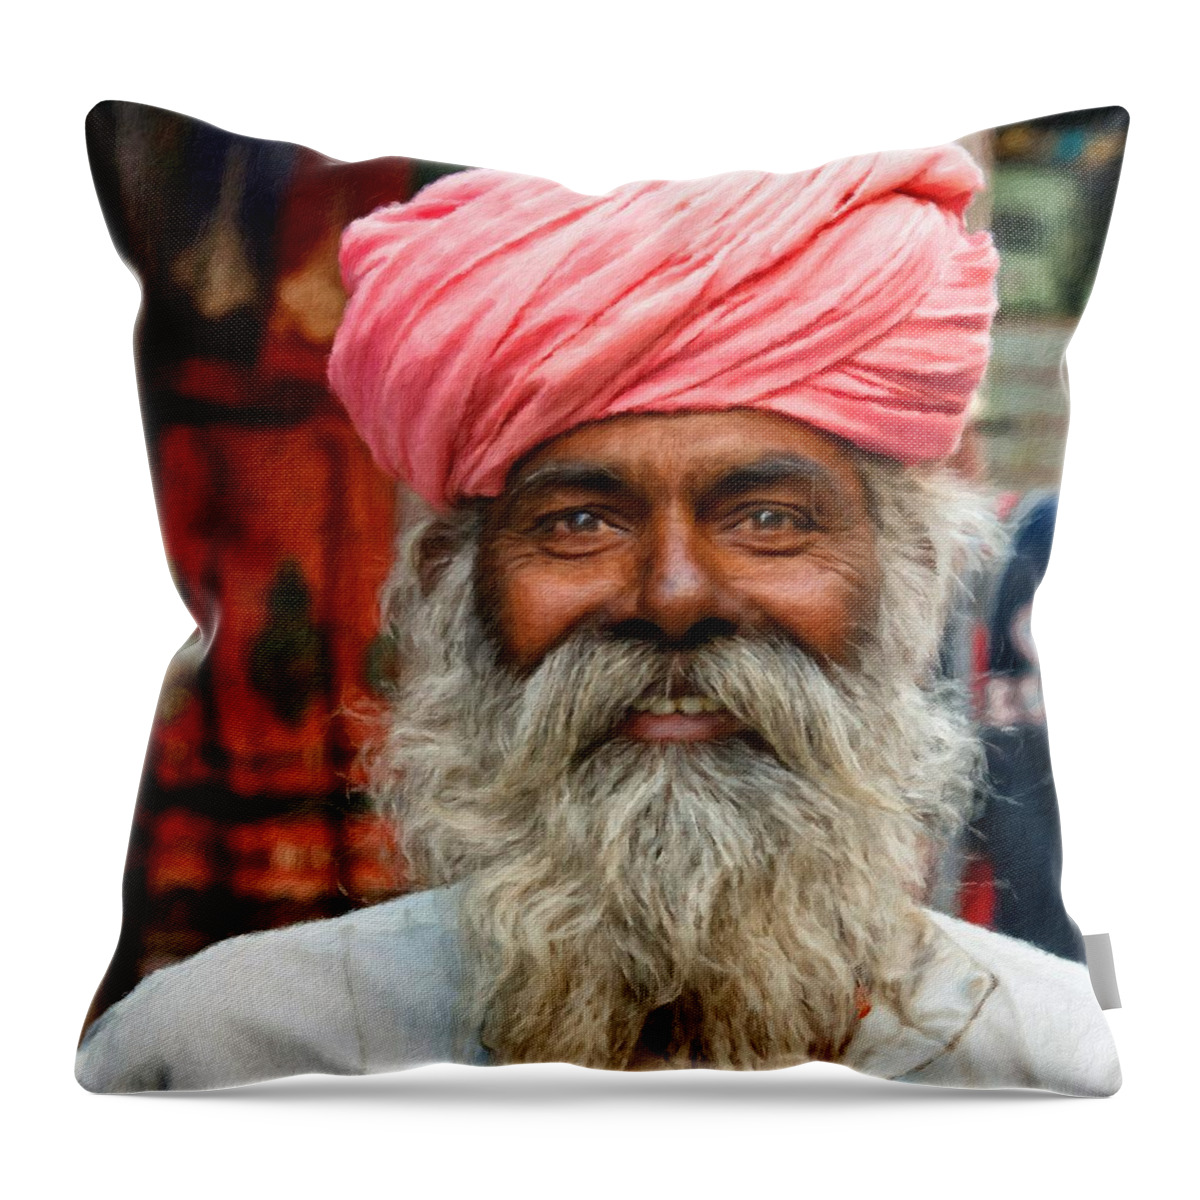 Laughing Man Throw Pillow featuring the painting Laughing Indian man in turban by Vincent Monozlay